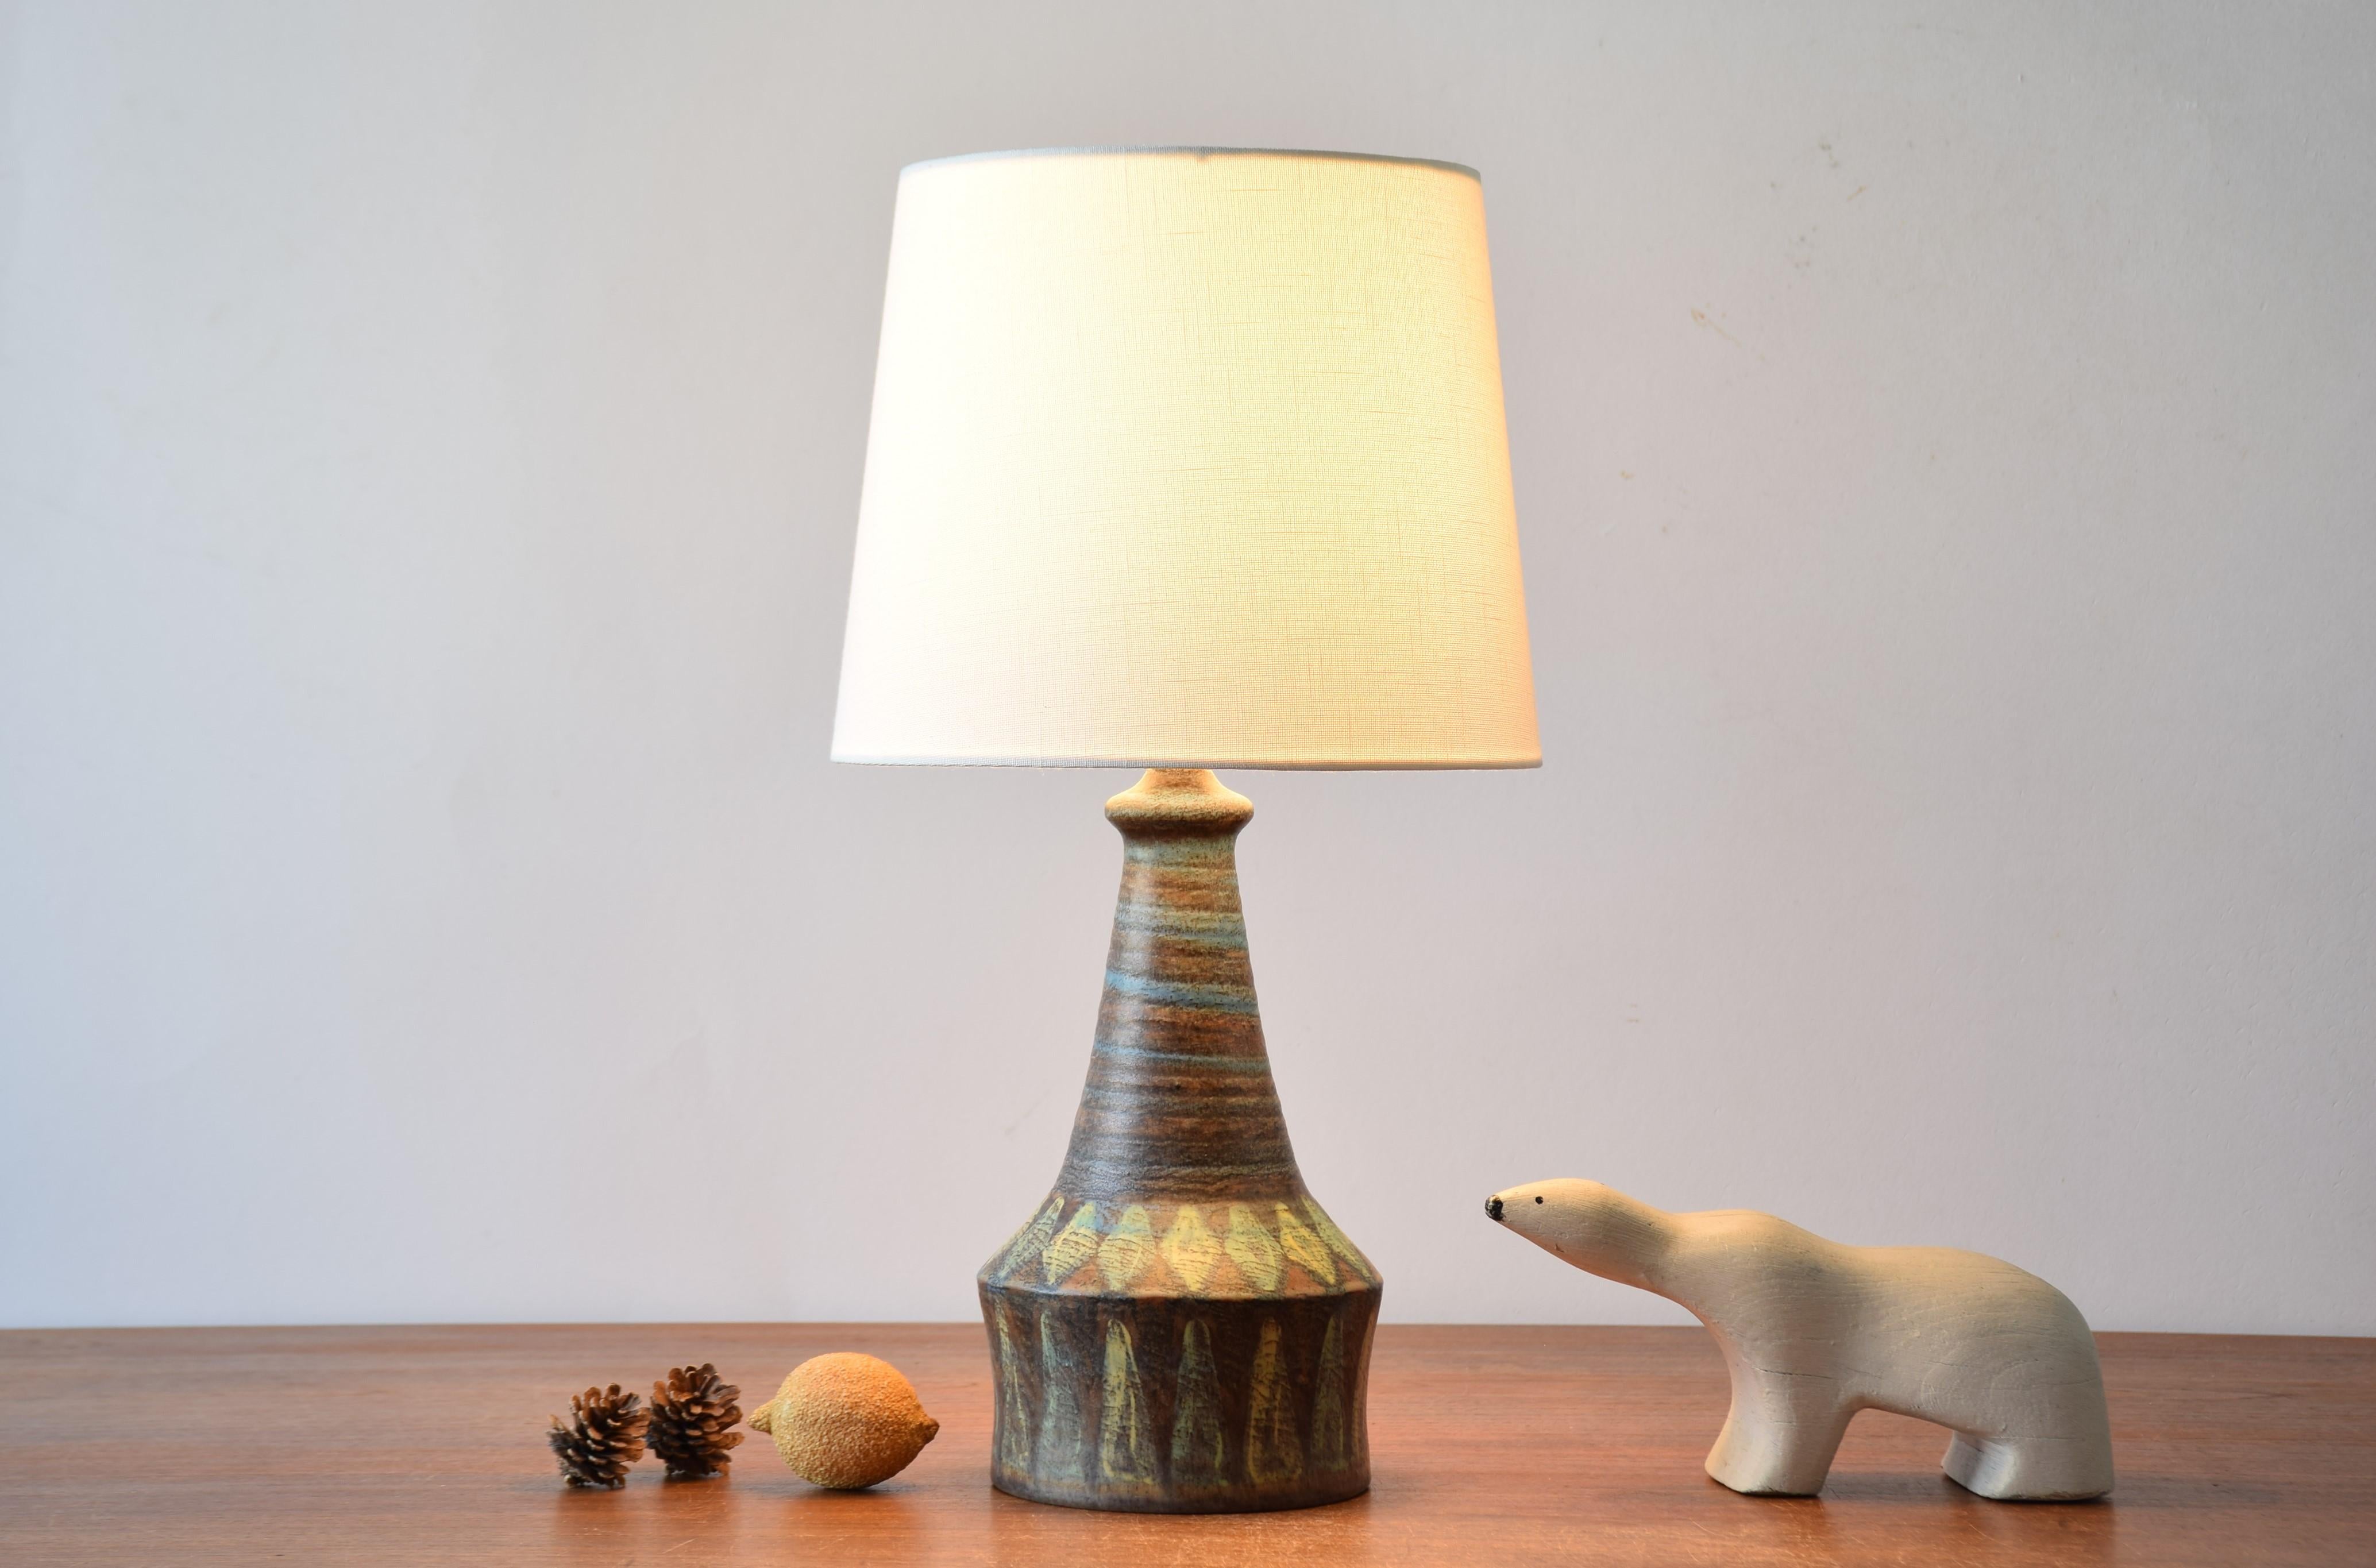 Mid-century ceramic table lamp by Danish painter and ceramist Kai Klinge (1925-2000). Made circa 1950s to 60s. 

The lamp is decorated with Kai Klinge´s typical matte glaze in brown and petrol blue, rhombuses and triangles in yellow and